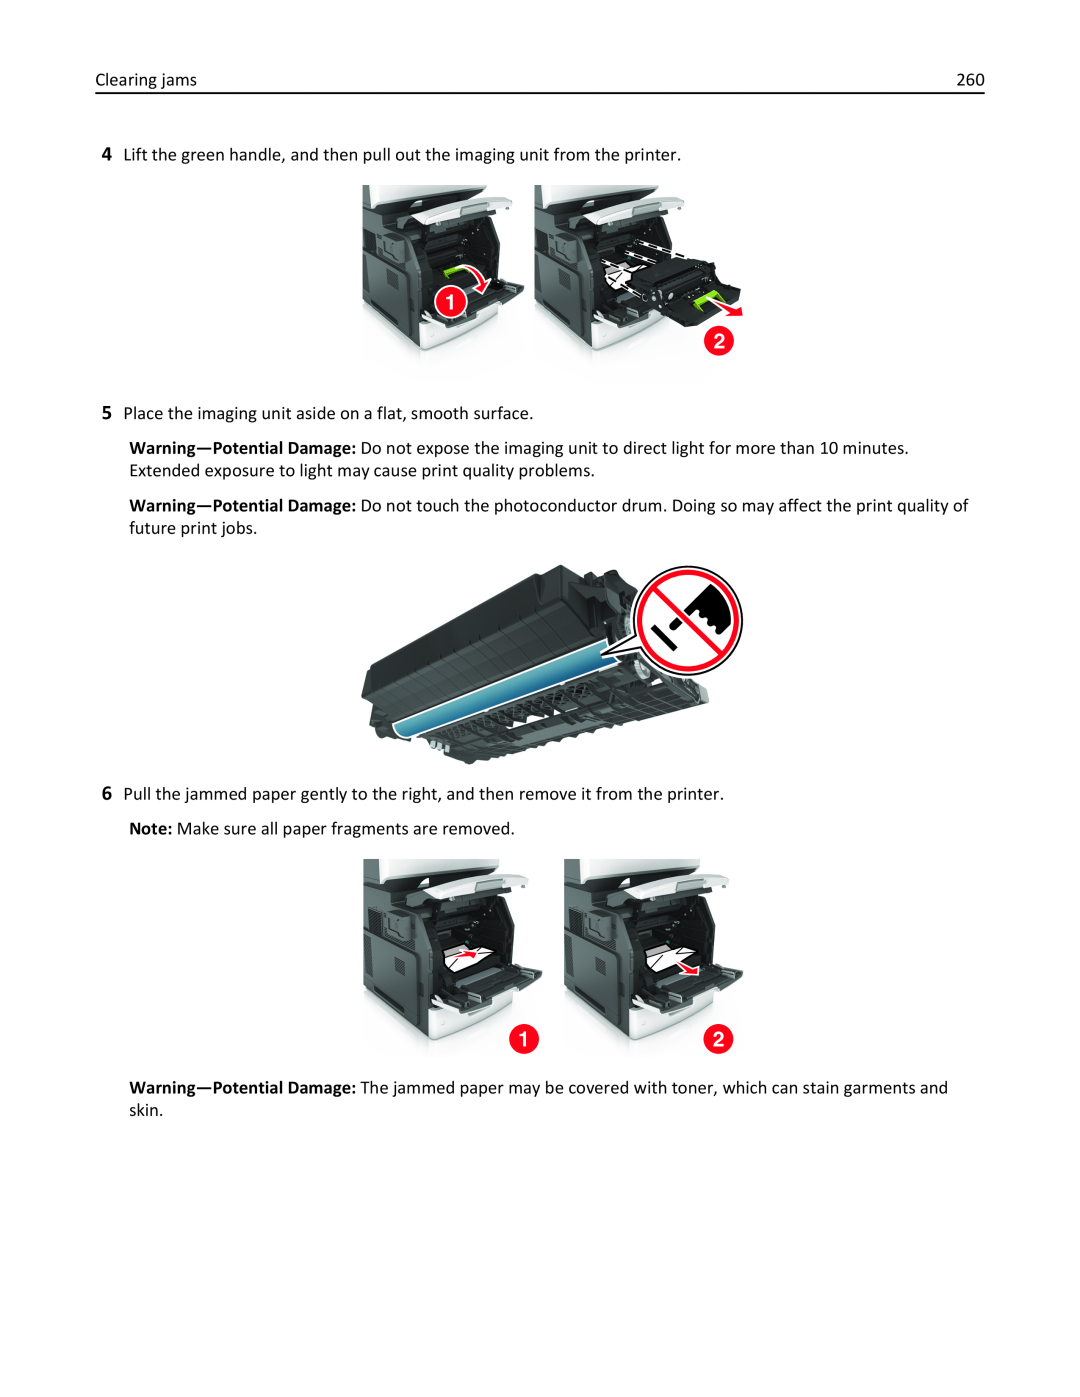 Lexmark MX710DHE, 24T7310, 237, 037 manual Clearing jams, Place the imaging unit aside on a flat, smooth surface 